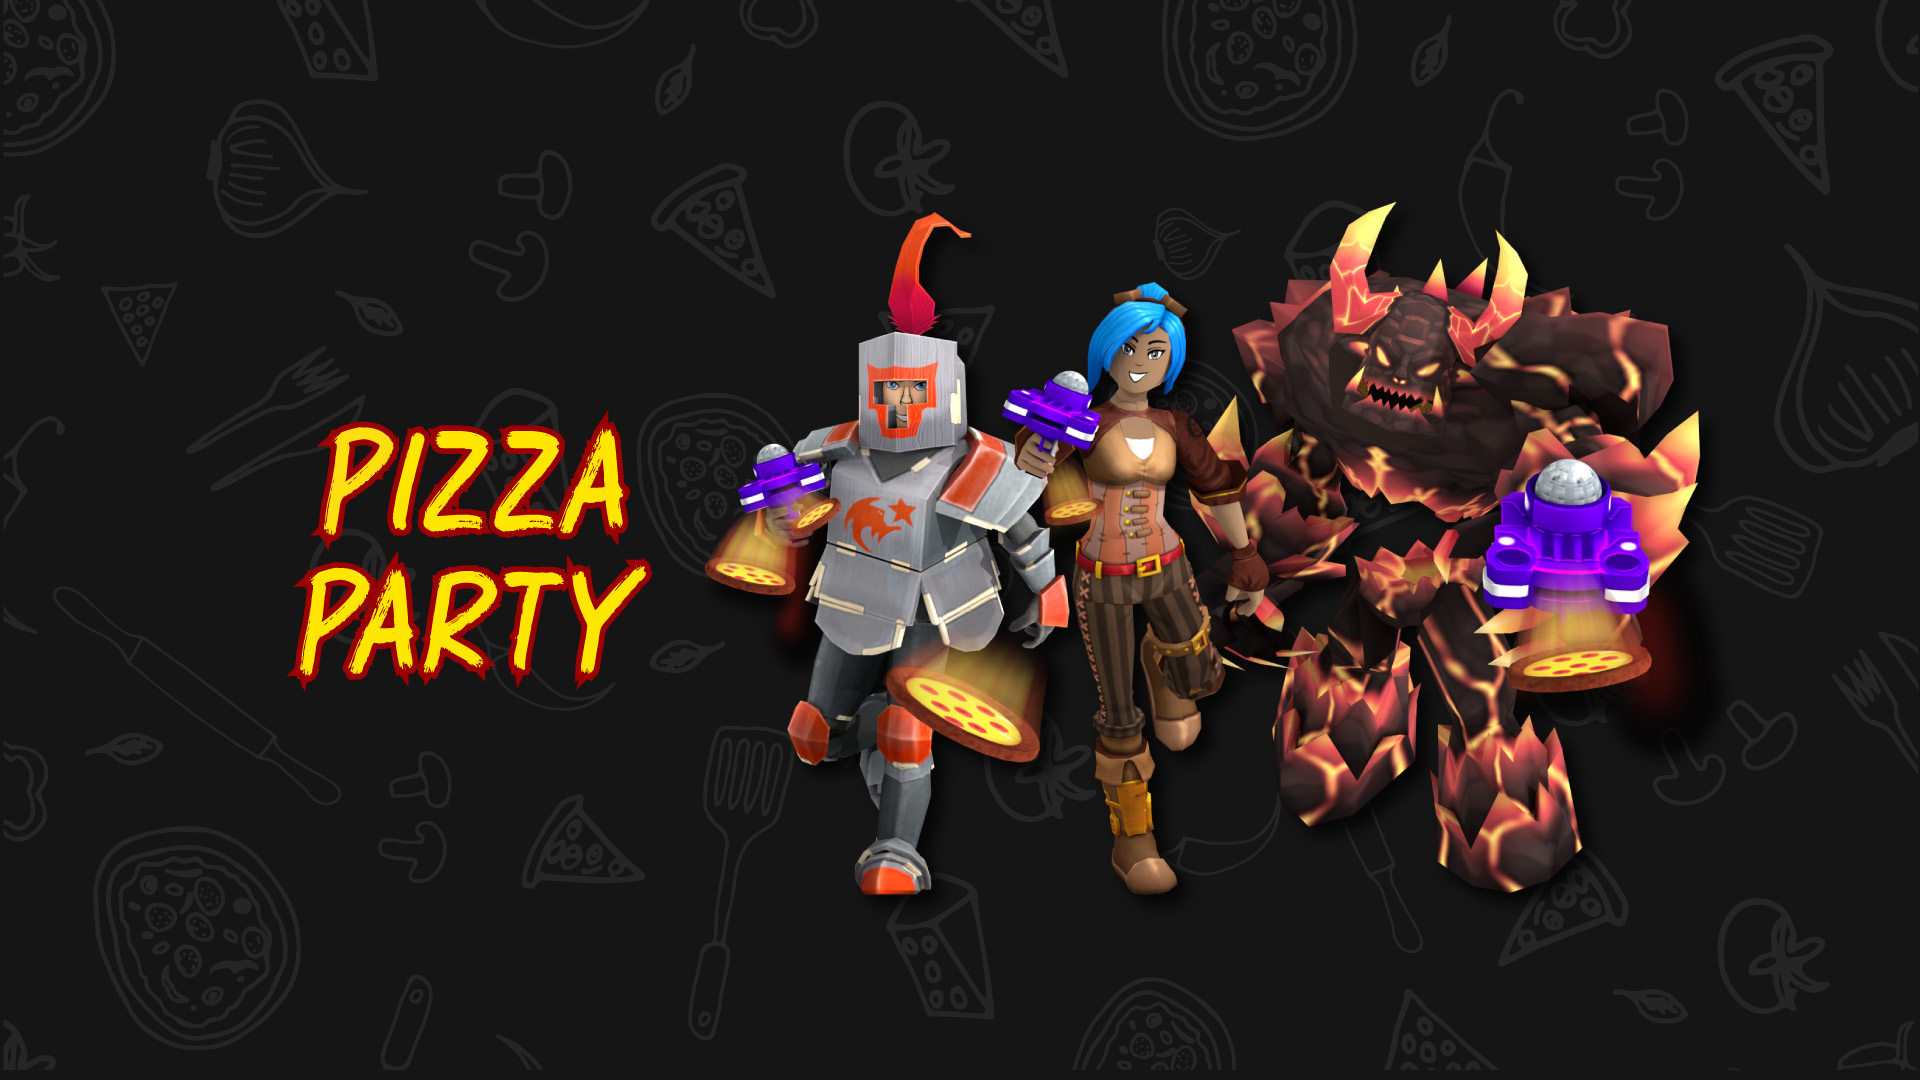 Pizza Party Event 2019 Roblox Blog